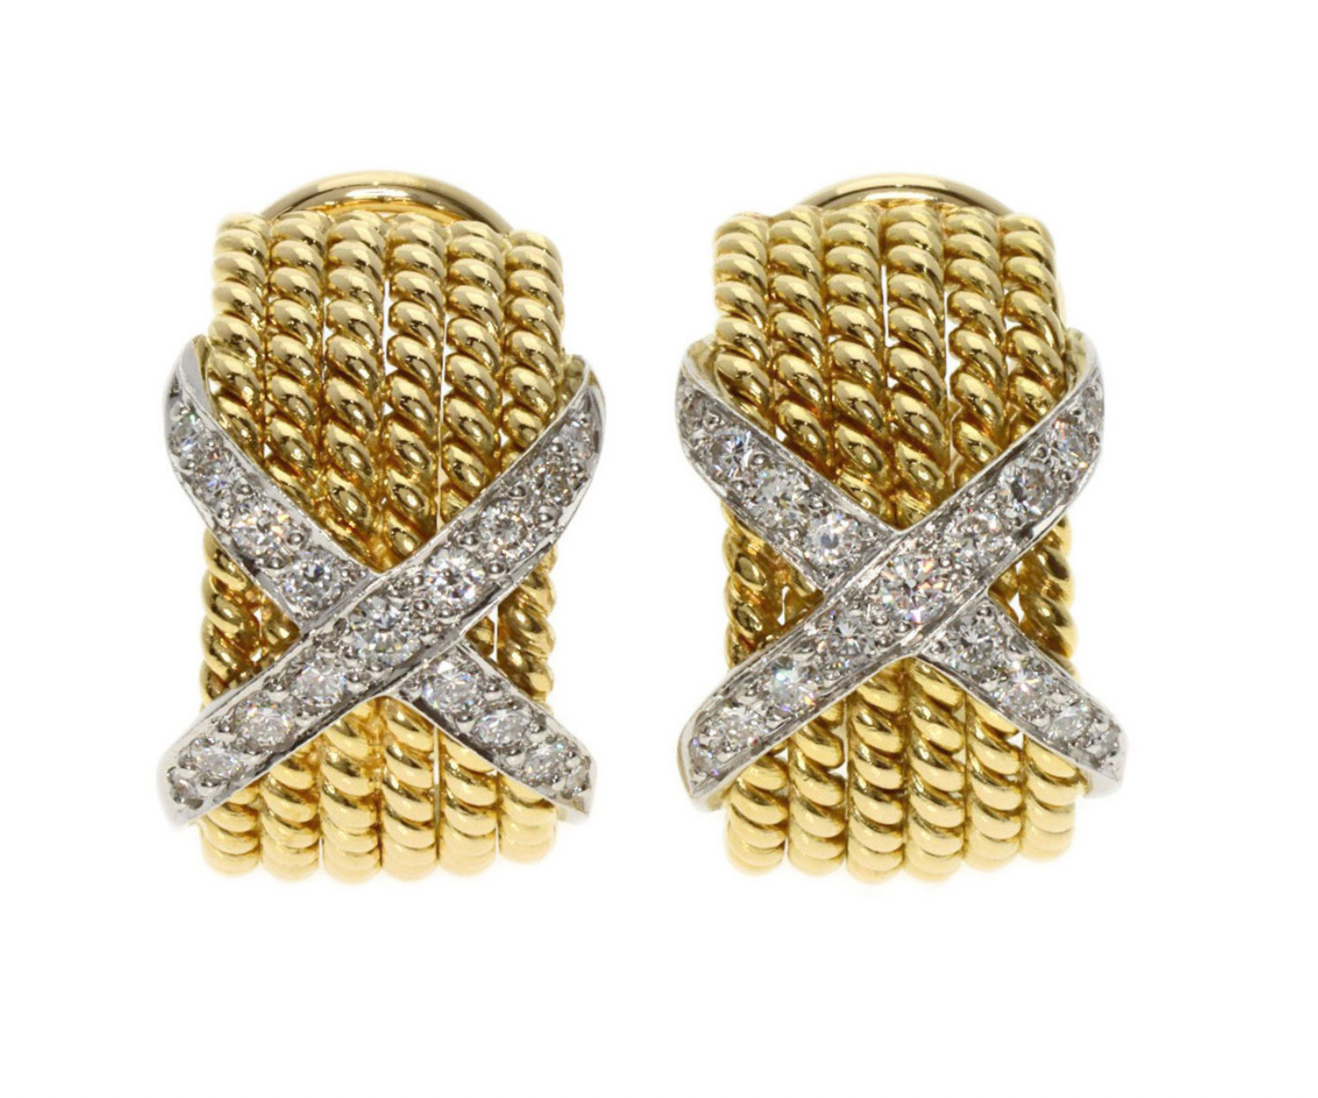 Pre-owned Jean Schlumberger for Tiffany & Co earrings crafted from 18k gold with diamonds